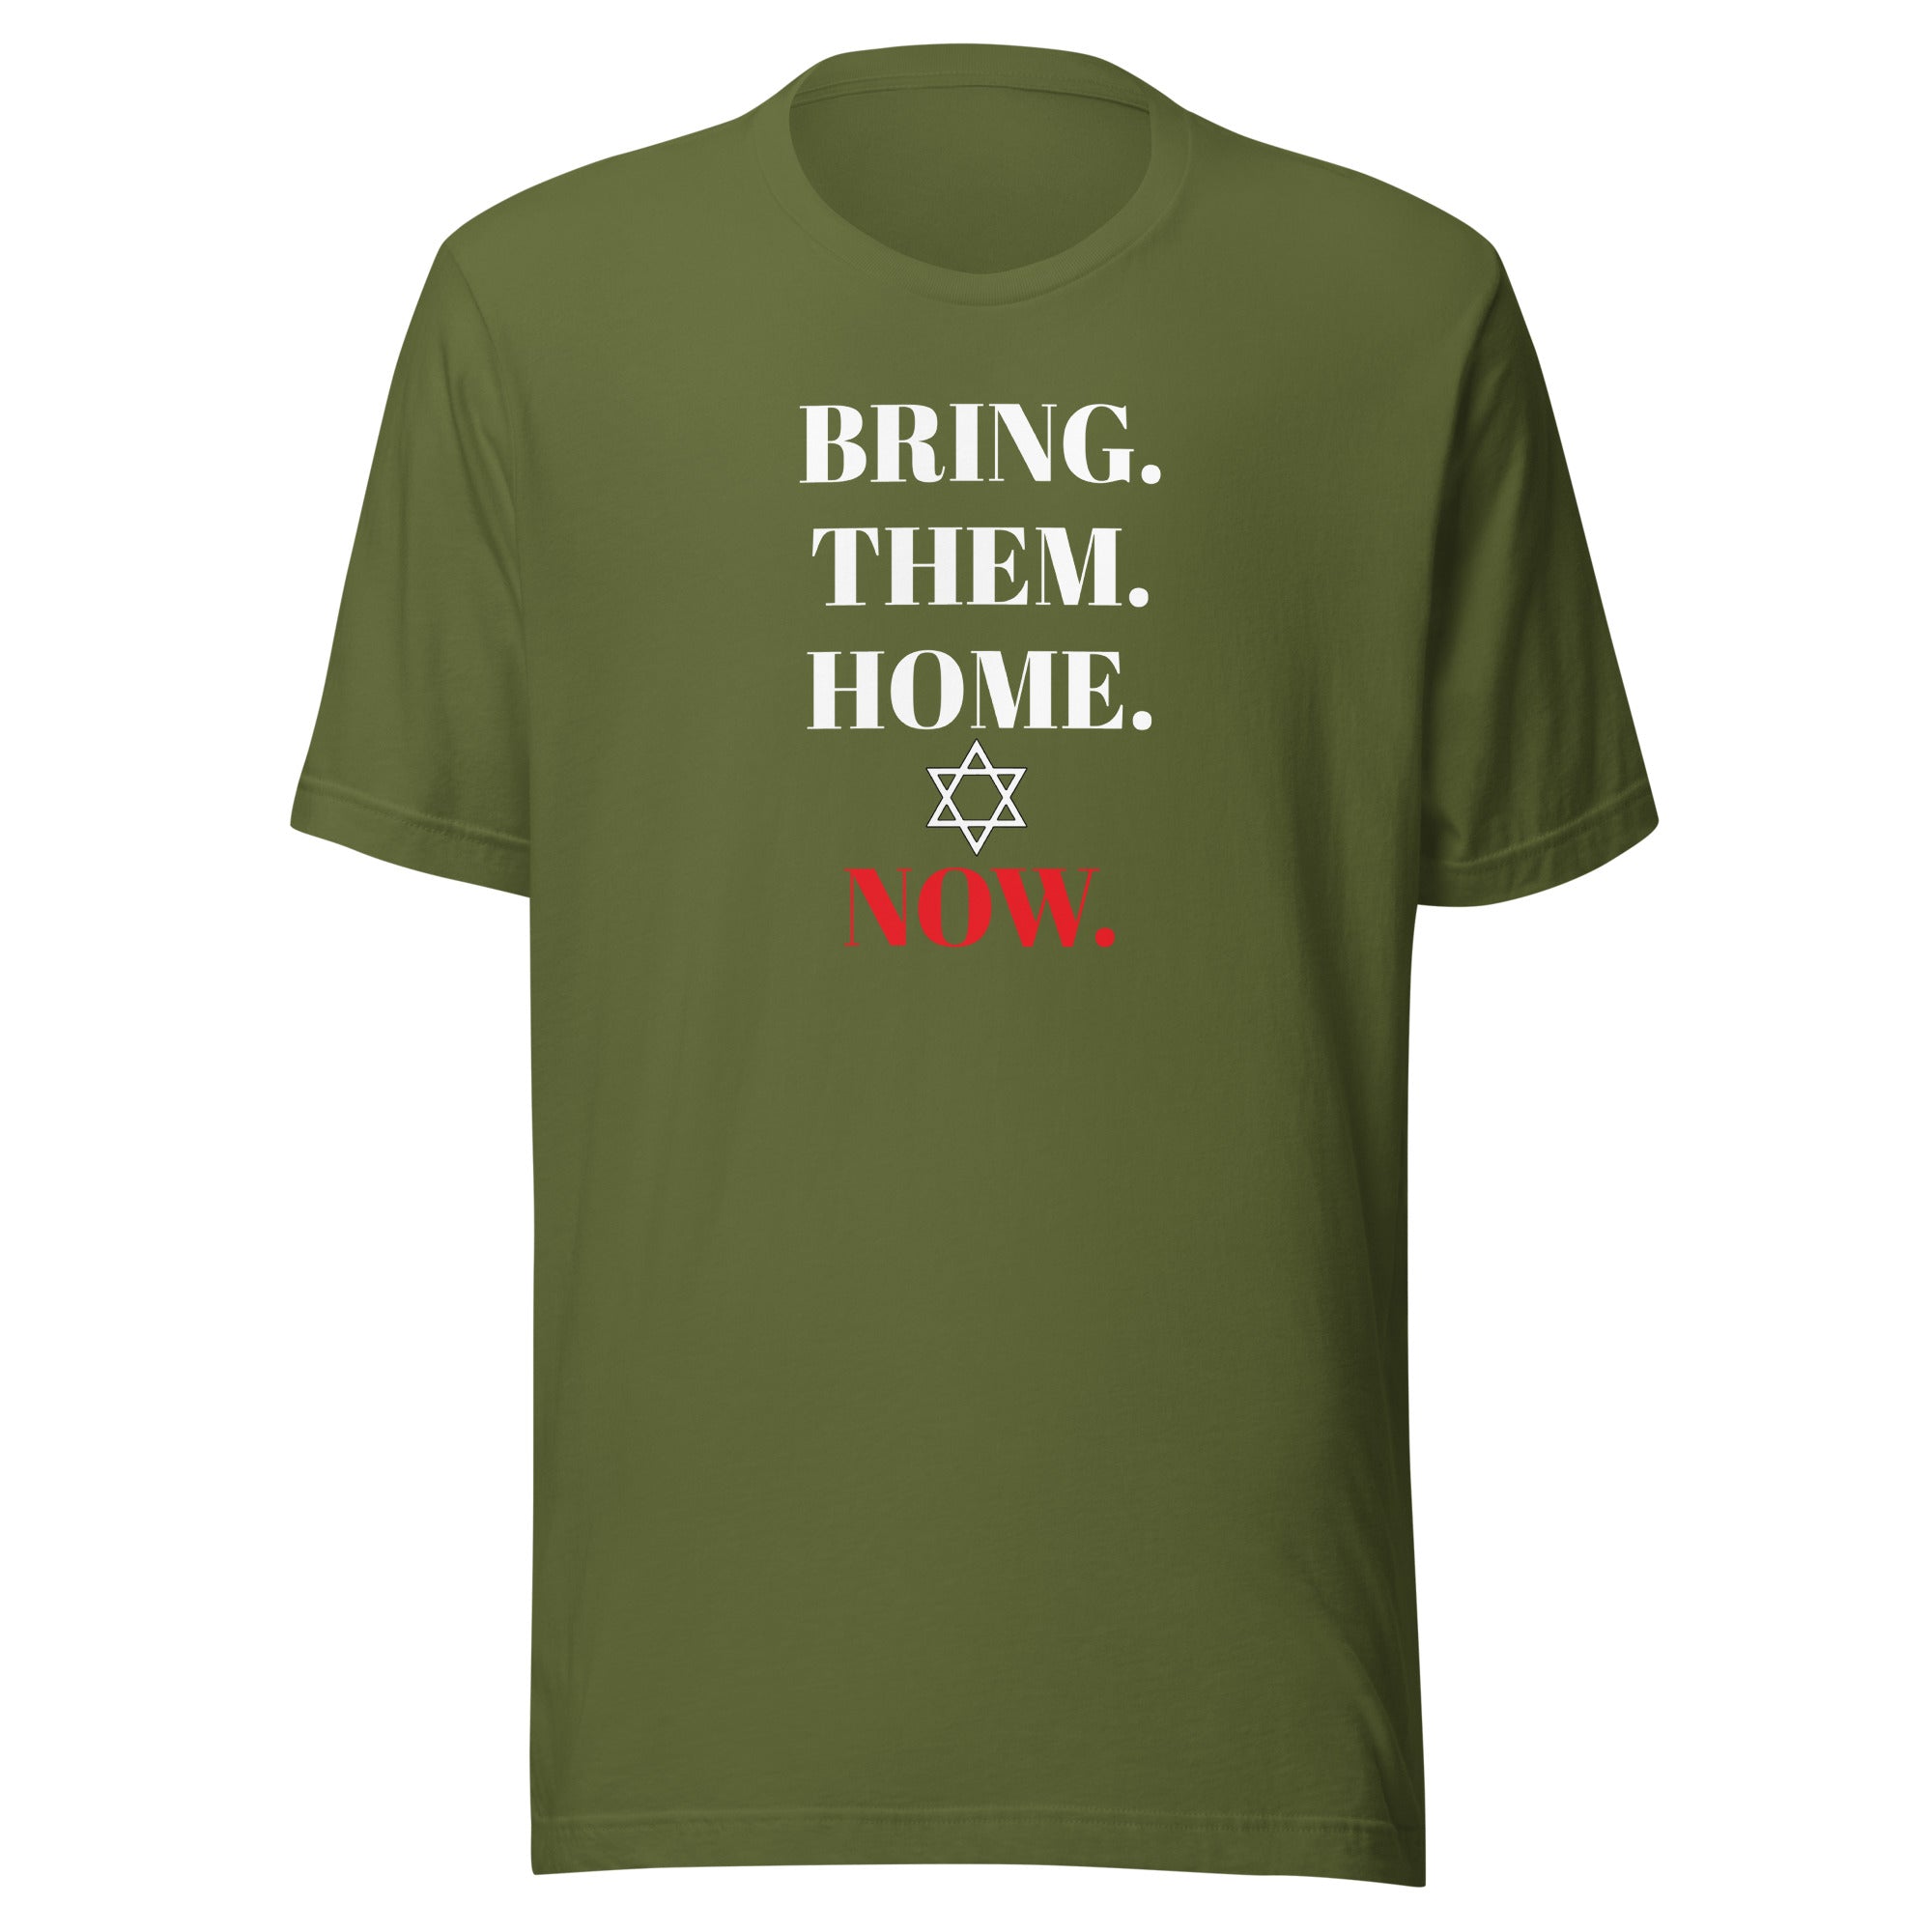 Bring Them Home Now - Unisex t-shirt